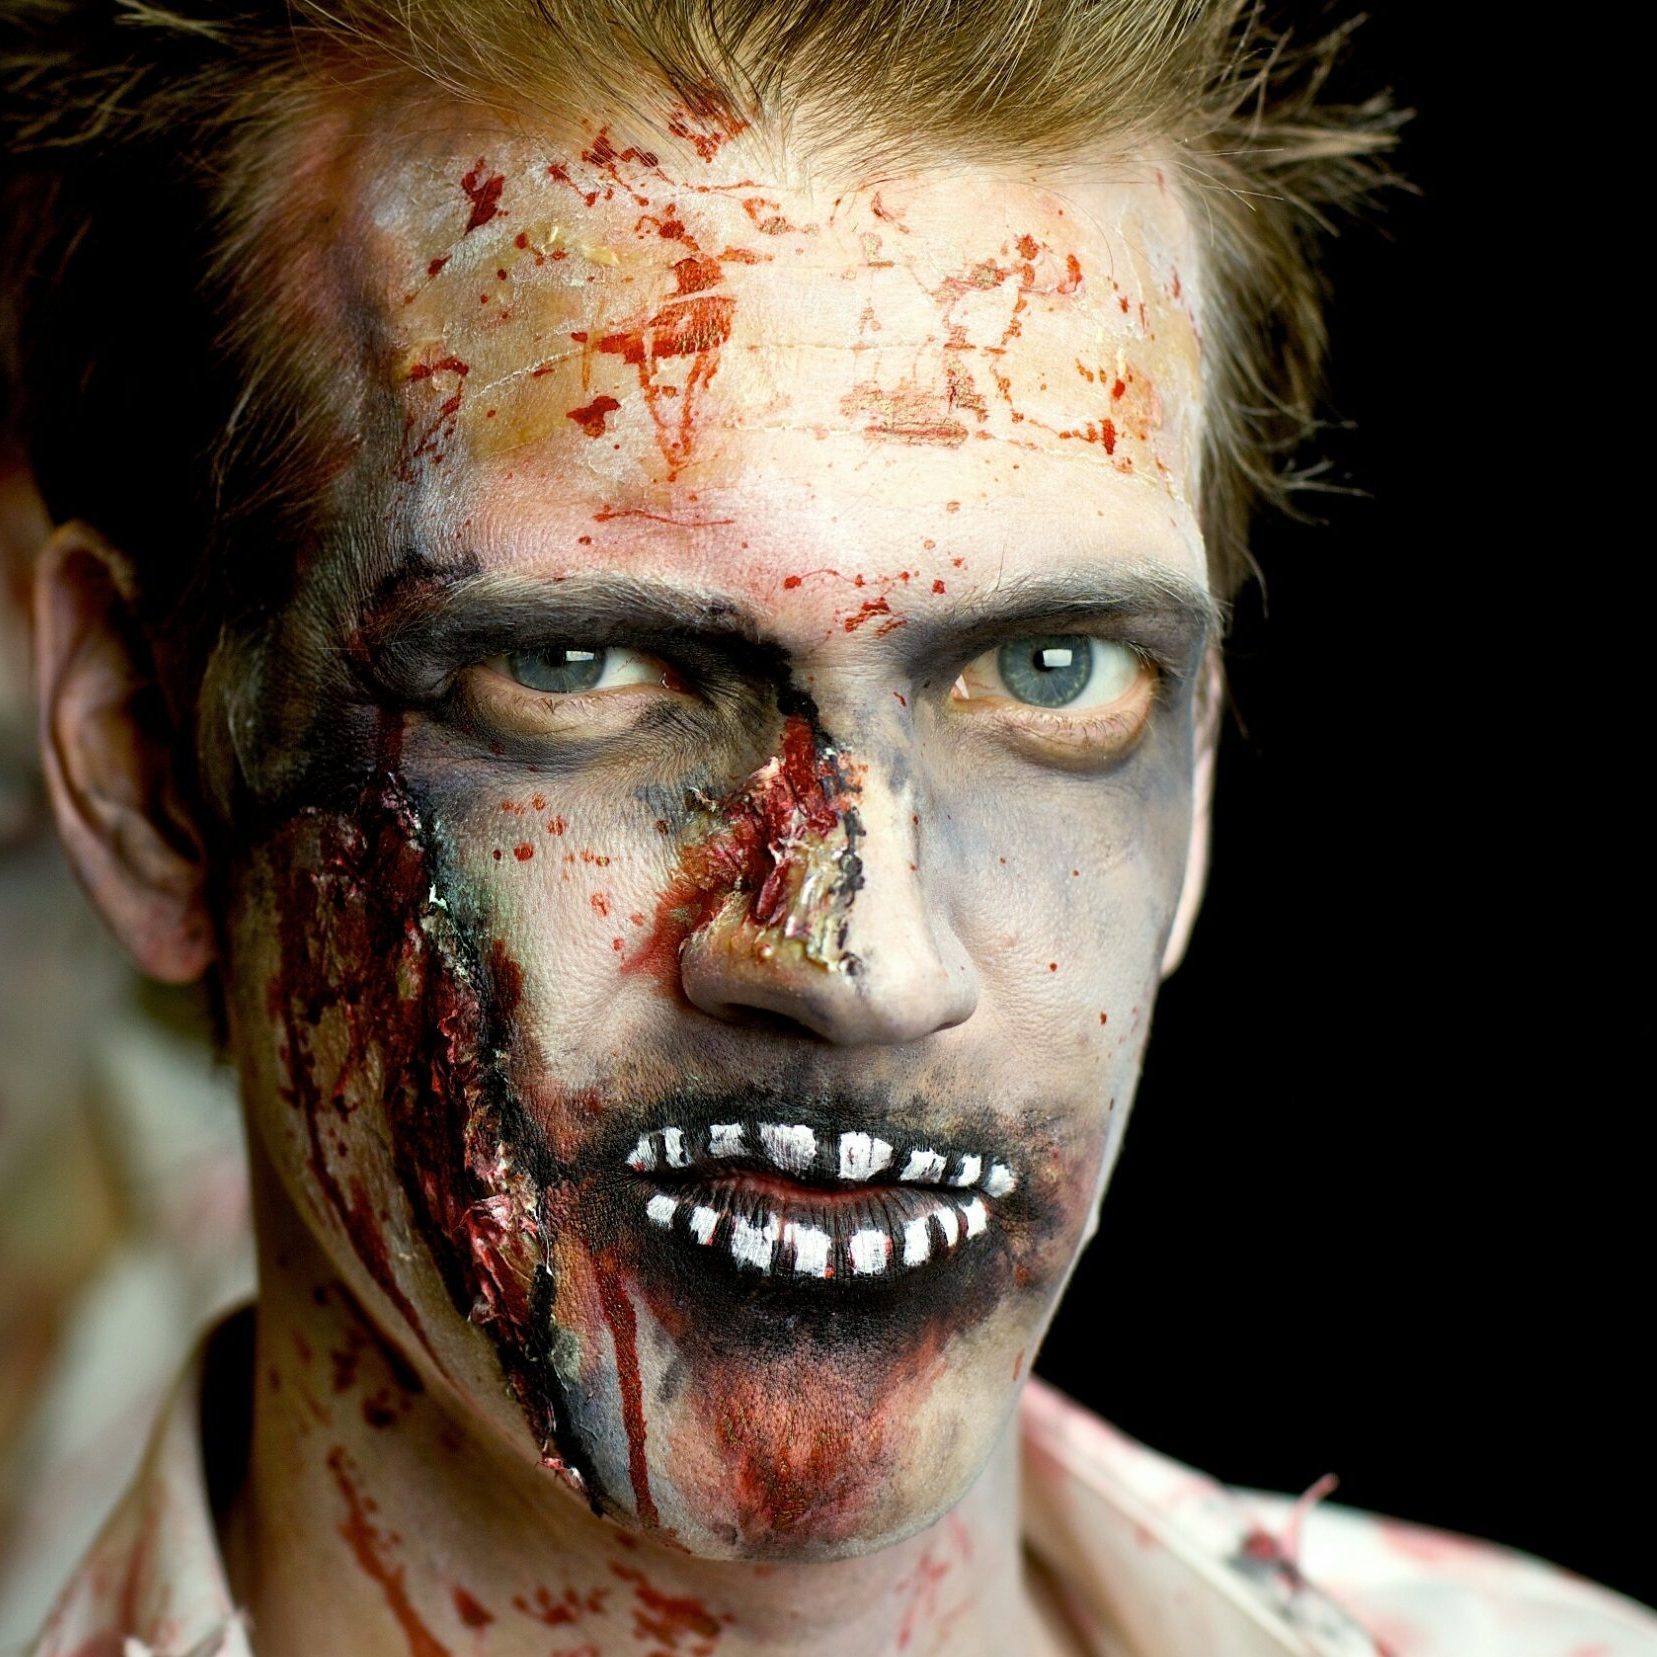 Portrait Of Man In Zombie Make-Up During Halloween